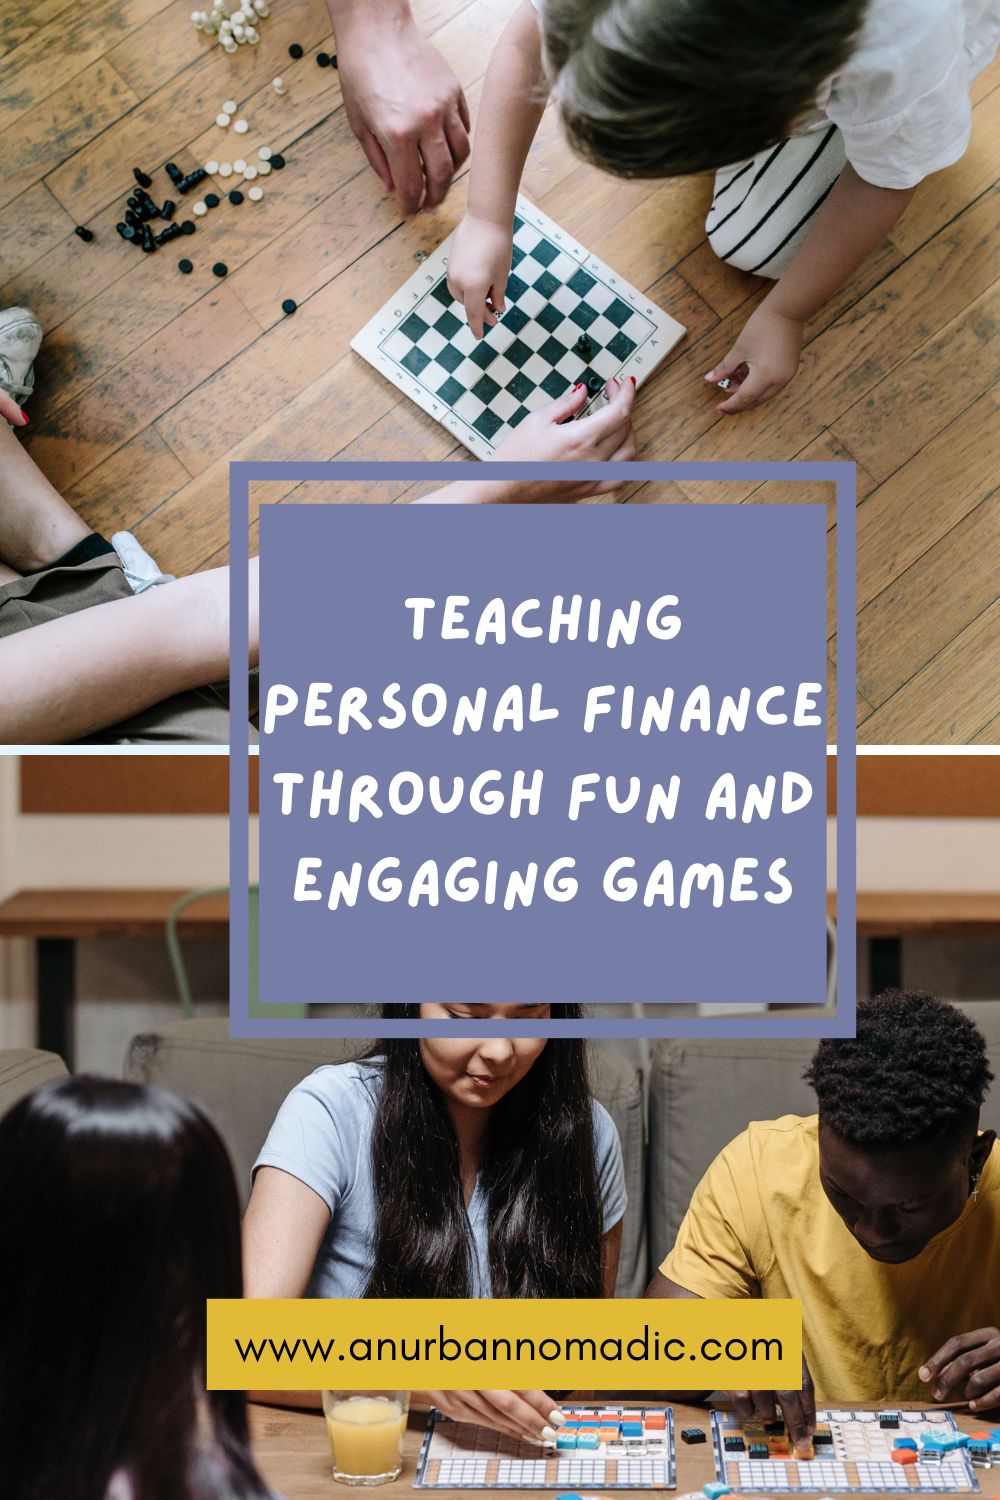 Do you want your kid to understand finance? but finding difficult to explain, you came at a right spot. This blog will help you find 6 fun games which can teach money to kids, the money game. Teaching kids about money through games is the right way to make them understand about money